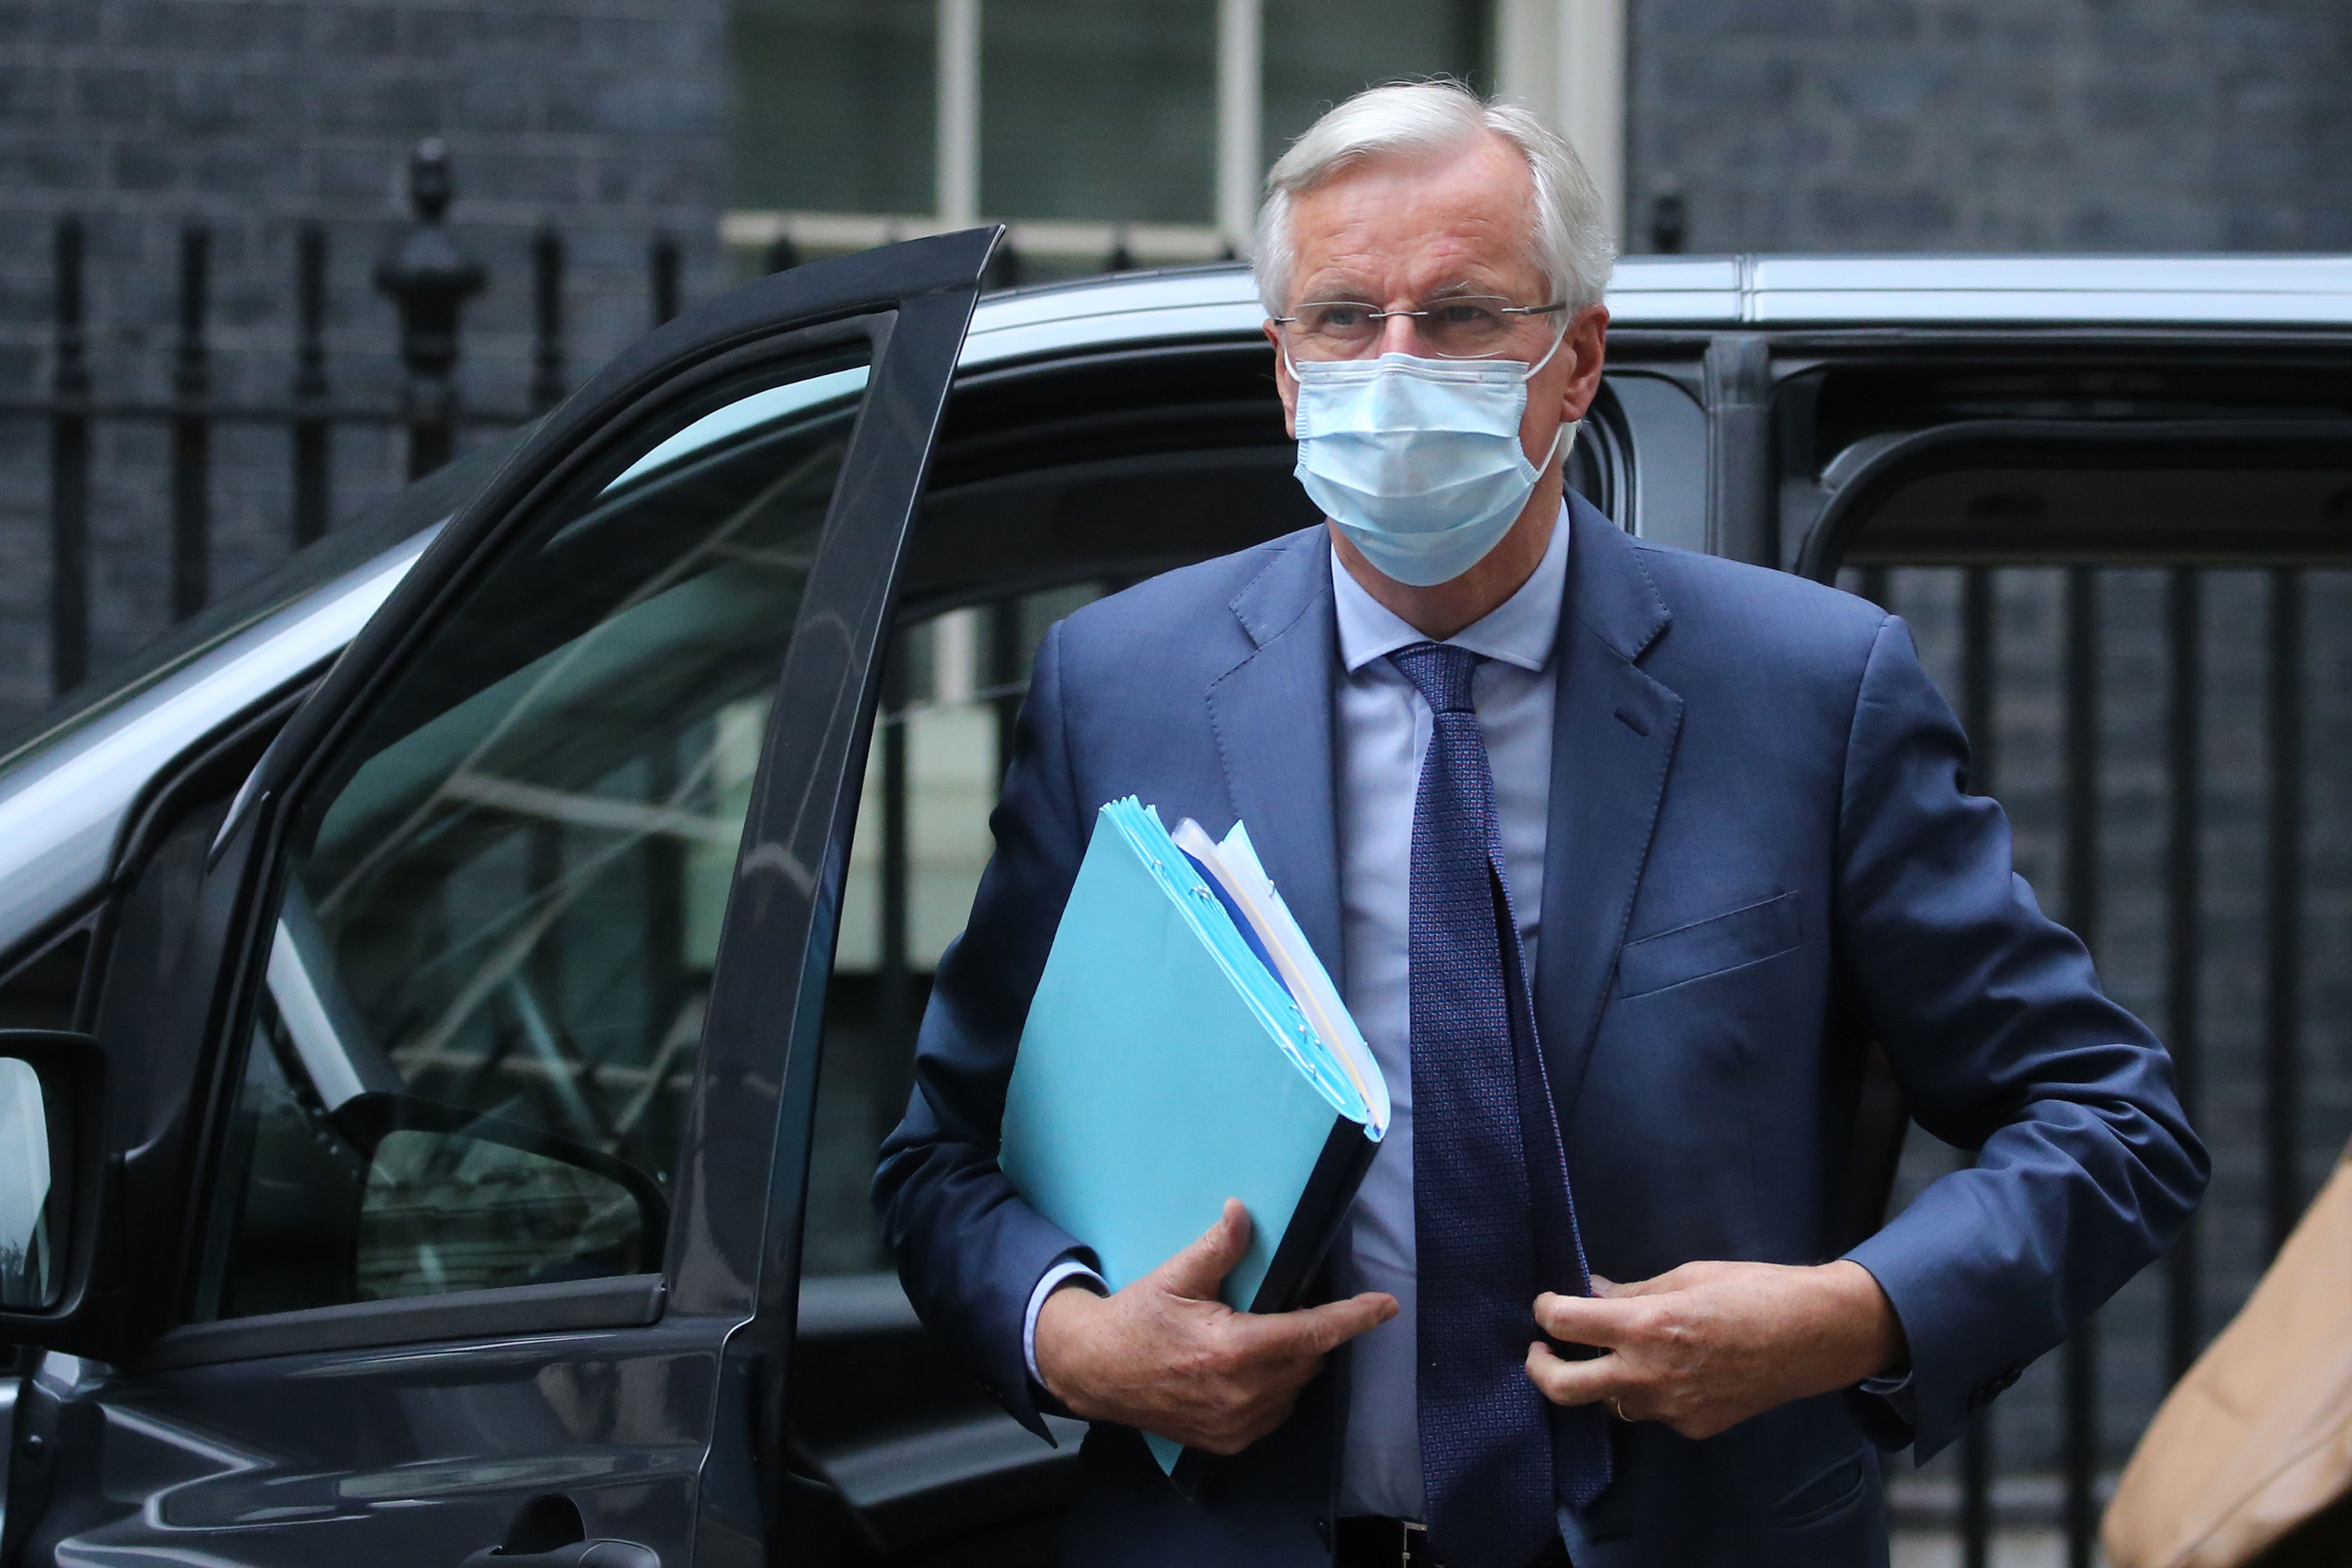 Michel Barnier arrives at 10 Downing Street in London on July 8.